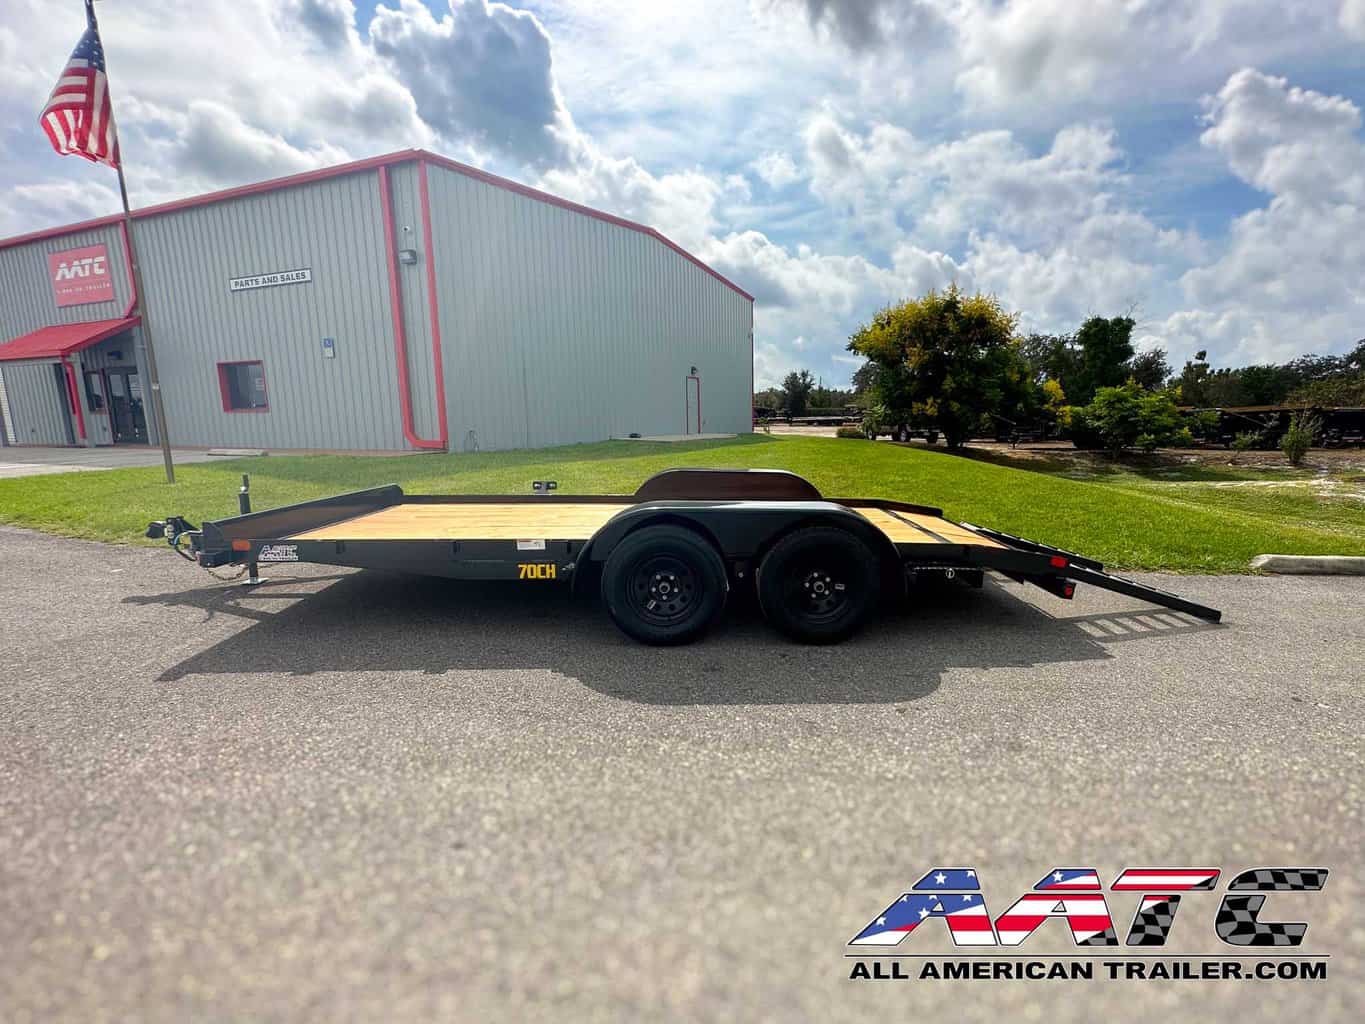 A reliable and versatile 16-foot car hauler trailer from Big Tex, model 70CH. This Big Tex Trailer features a tandem axle, wood deck, and a convenient dovetail design. With a 7000 GVWR, electric brakes, and a load capacity of 5118 lbs, it's a dependable choice for various utility and car hauling needs. The bumper pull tongue type makes it easy to tow and transport your vehicles.